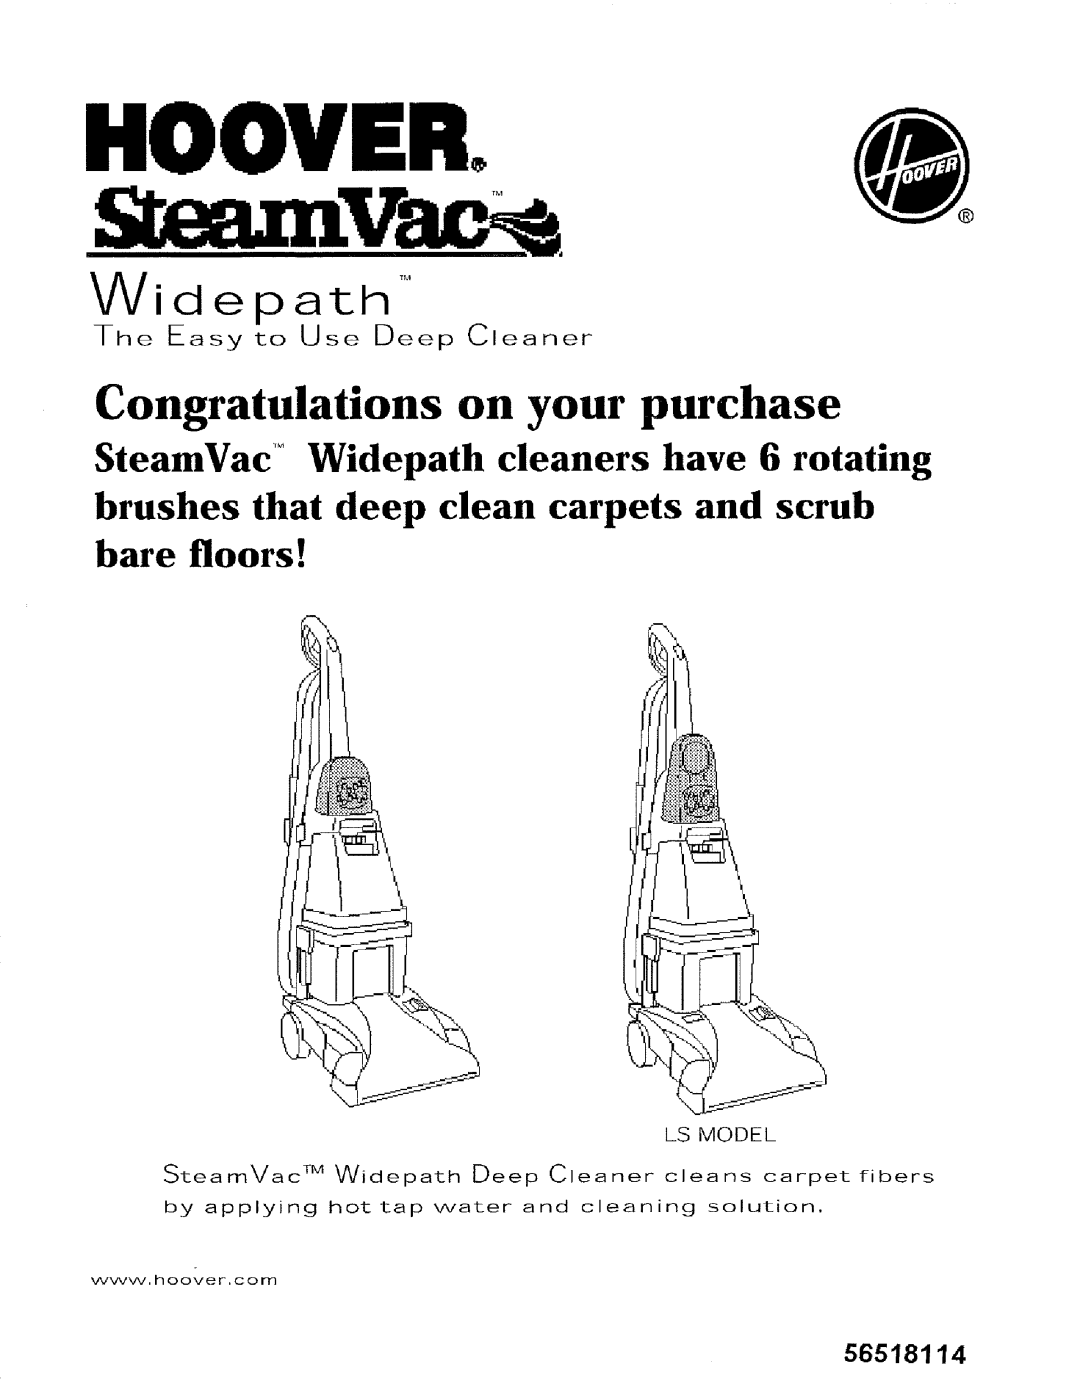 Hoover 56518114 manual The Easy to Use Deep Cleaner, SteamVac by applying, hot tap water and cleaning solution, Hoover 